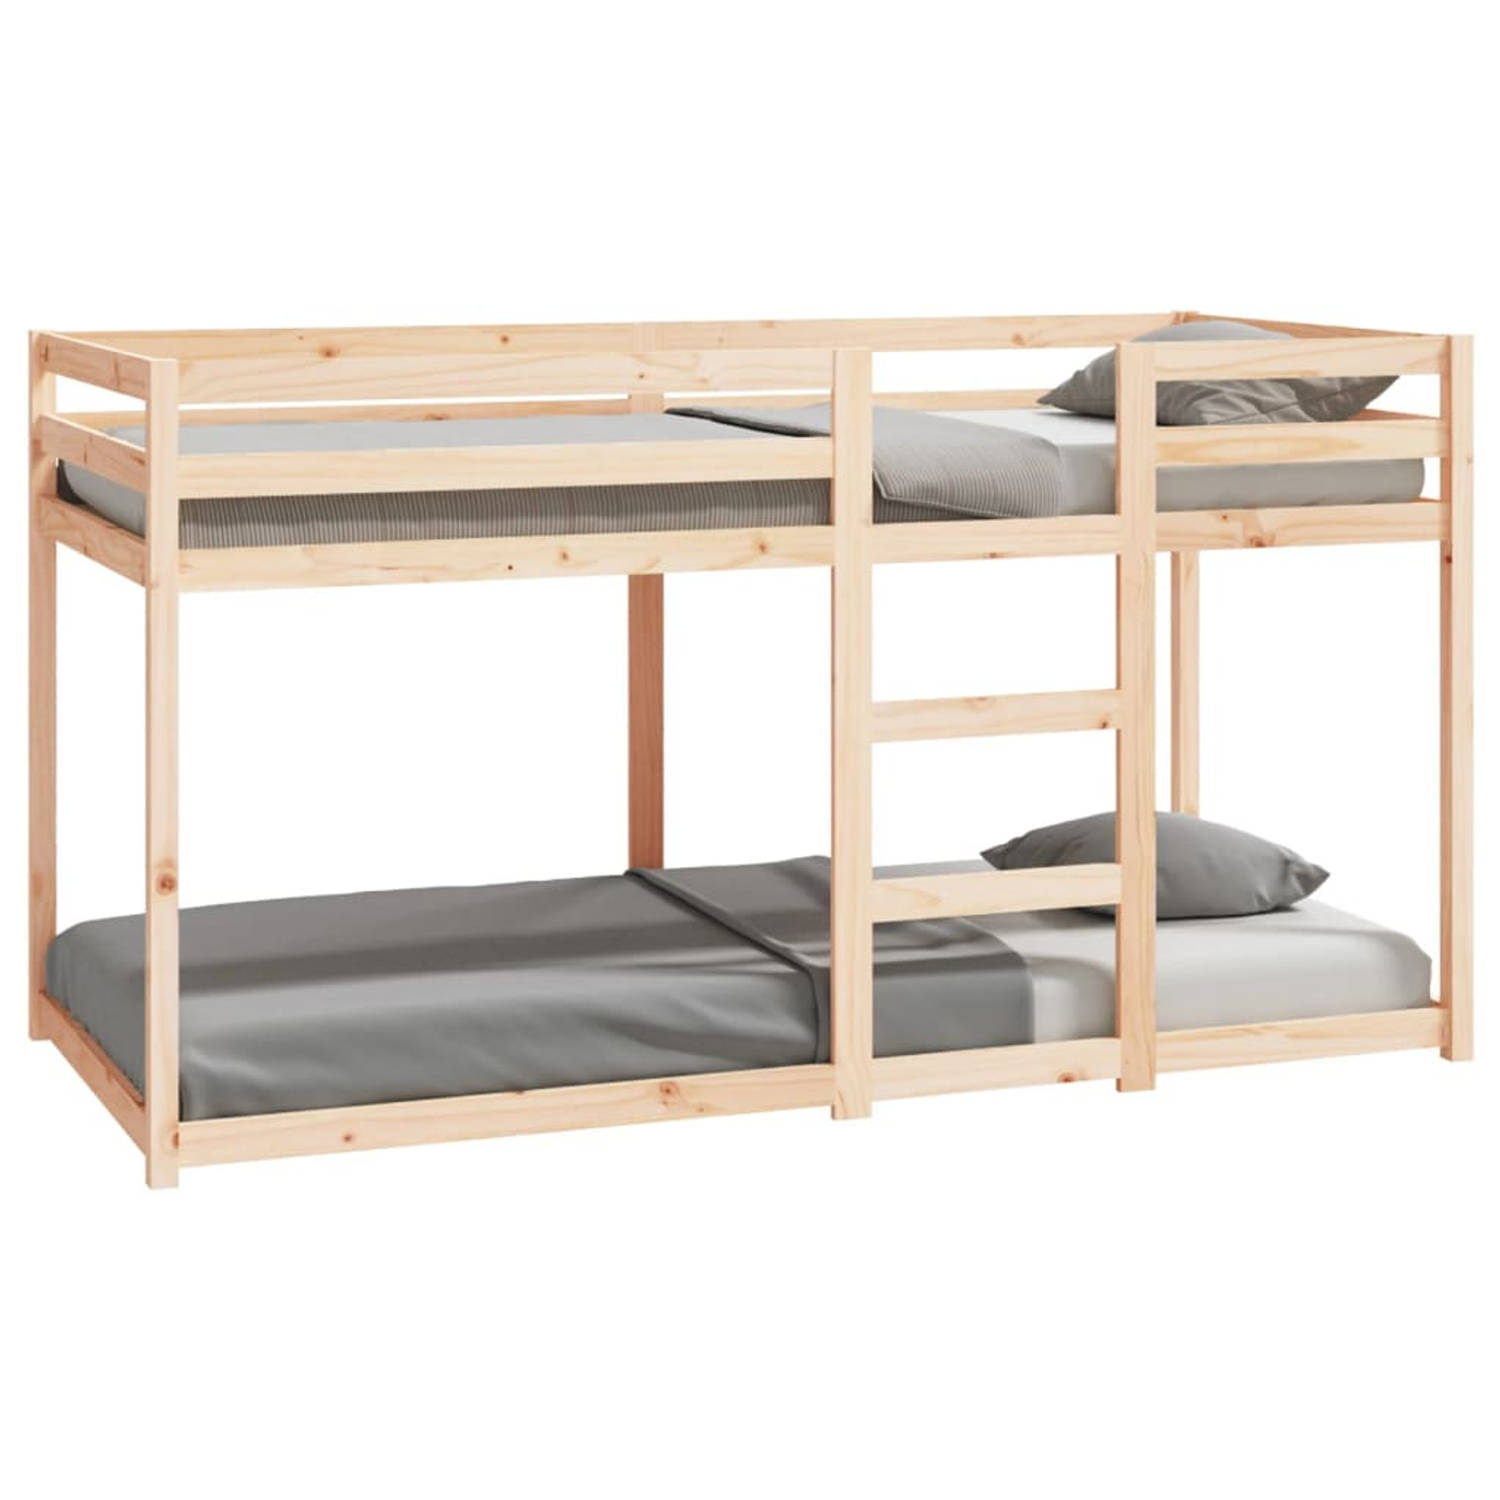 The Living Store Stapelbed massief grenenhout 90x200 cm - Stapelbed - Stapelbedden - Bed - Bedframe - Stapelbedframe - Bed Frame - Bedden - Bedframes - Stapelbedframes - Bed Frames